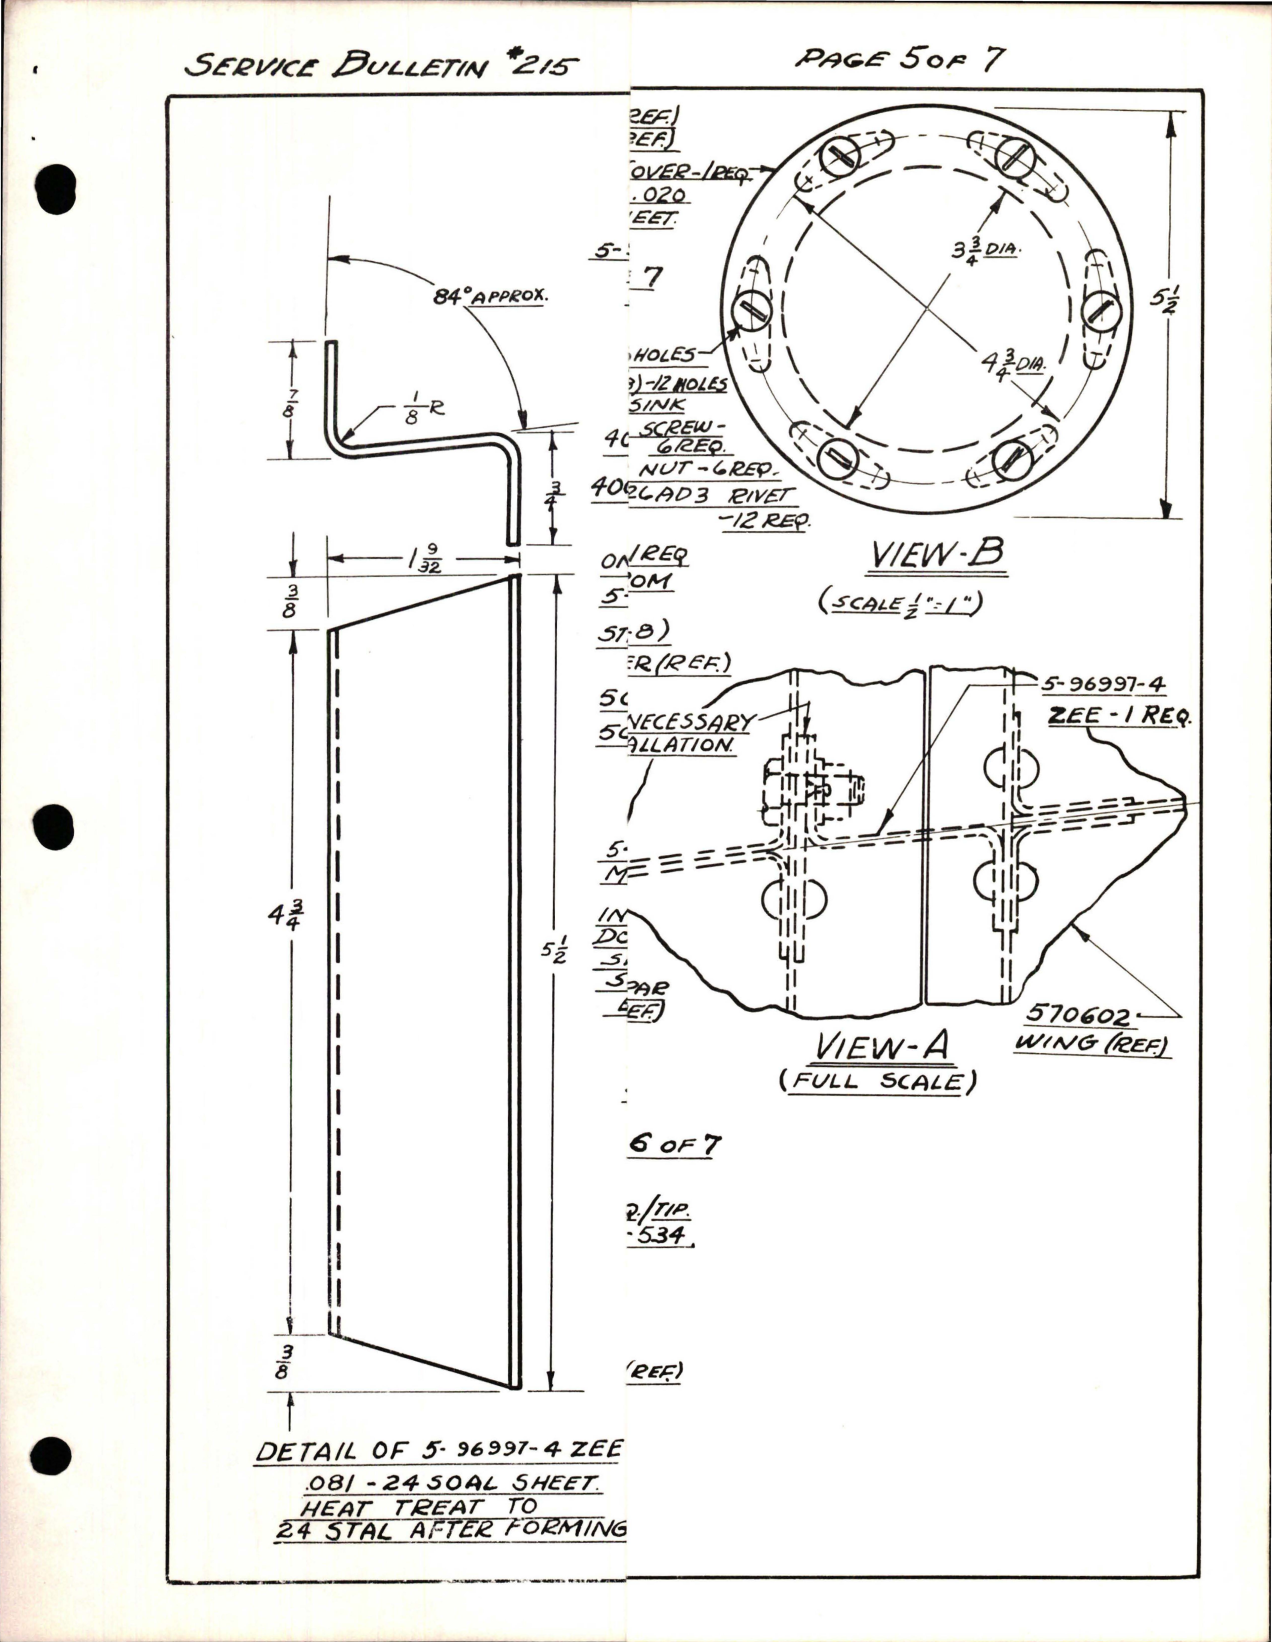 Sample page 5 from AirCorps Library document: Wing Tip Structure Alterations